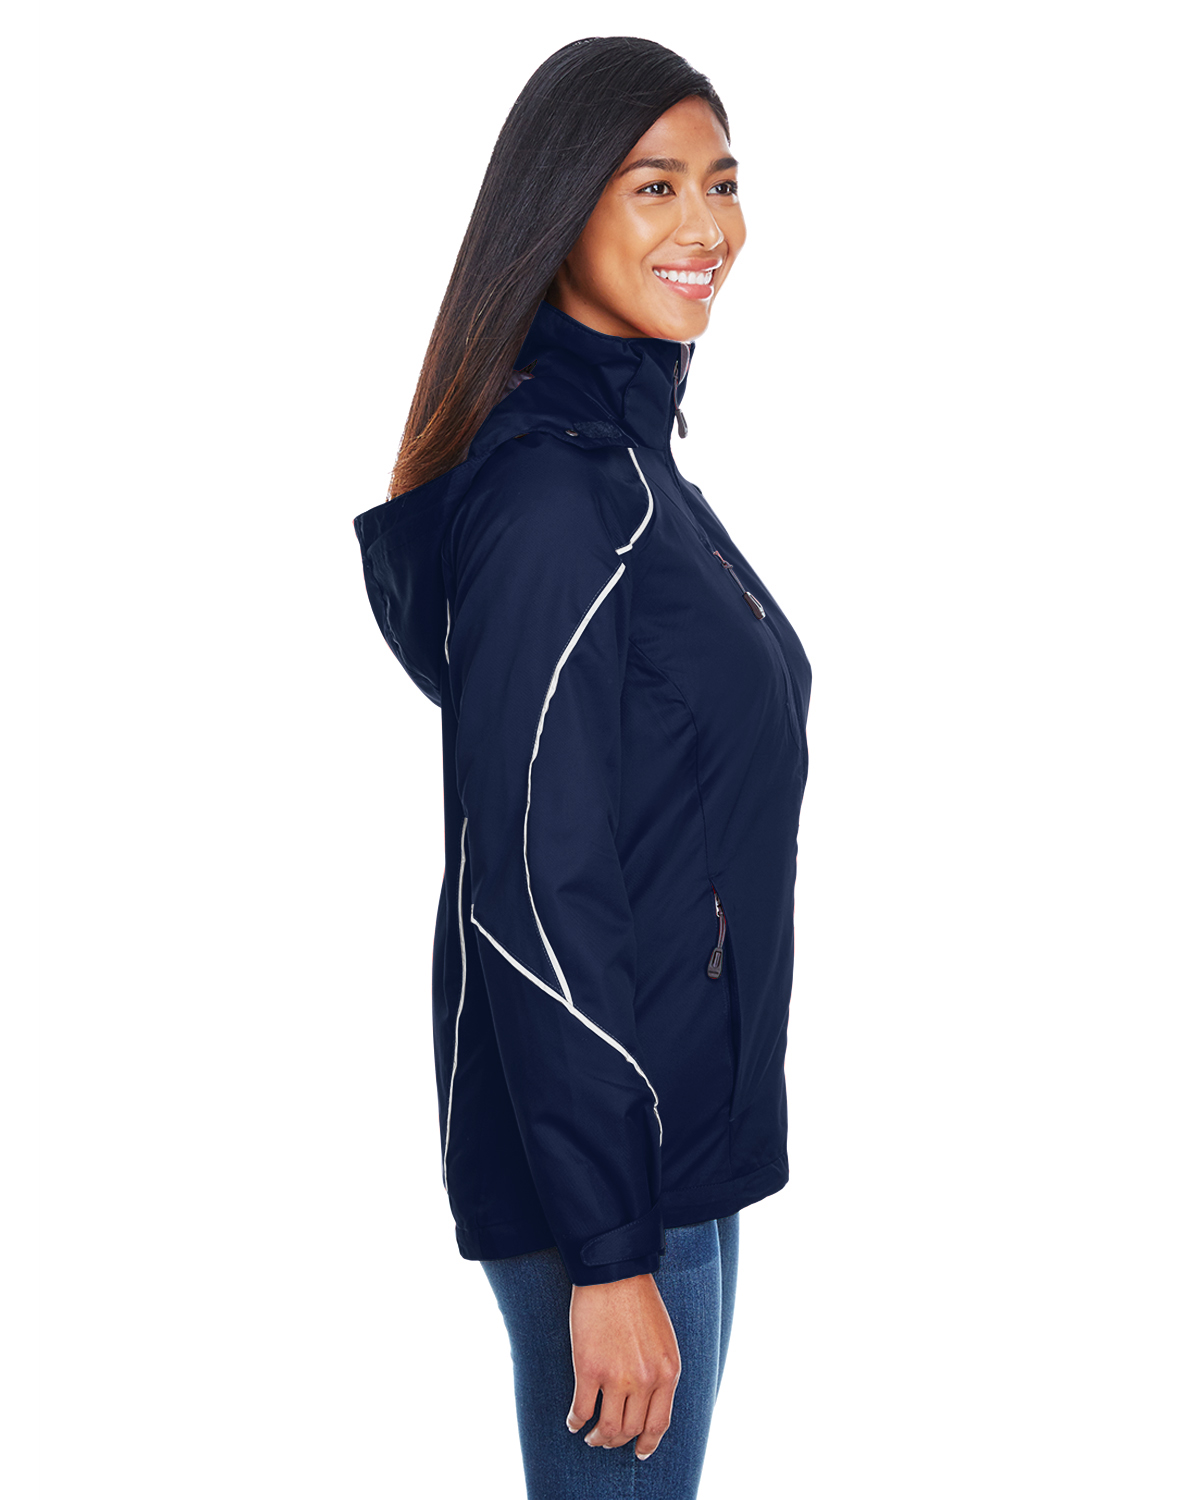 Ladies' Angle 3-in-1 Jacket with Bonded Fleece Liner - NIGHT - XS - image 3 of 3